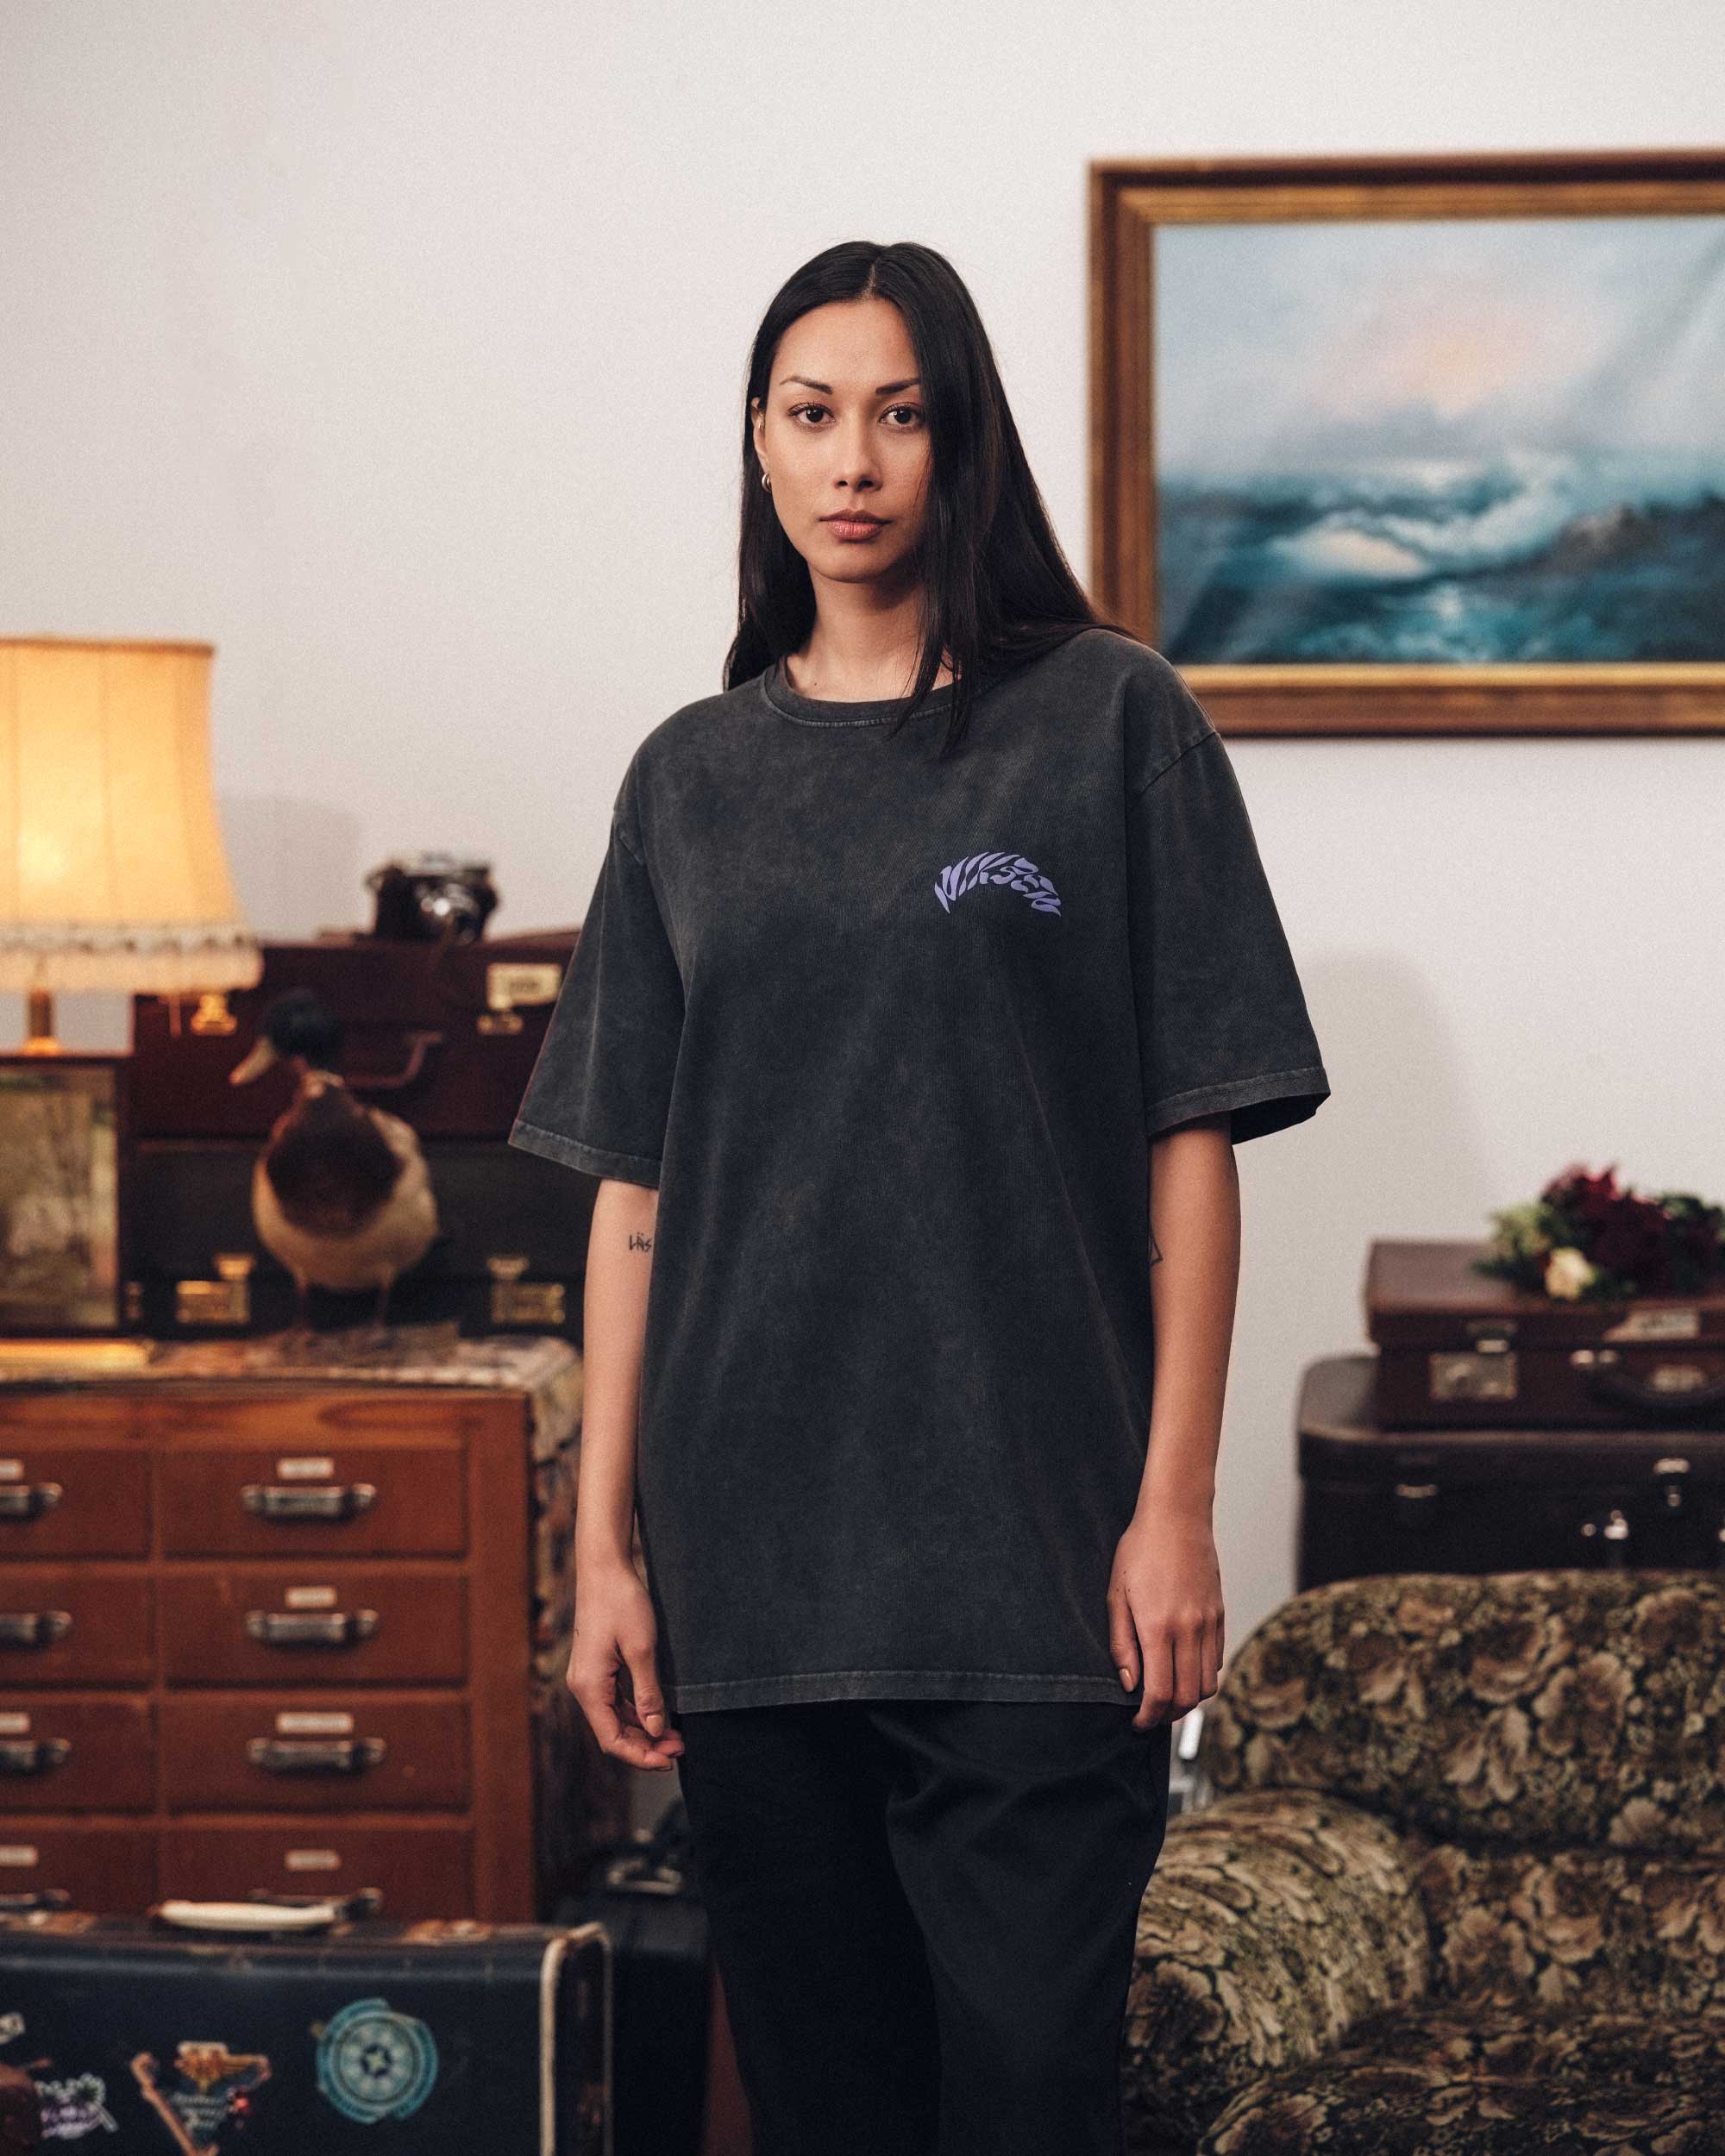 Female model wearing a washed black t-shirt with purple "Nikben" logo on chest.